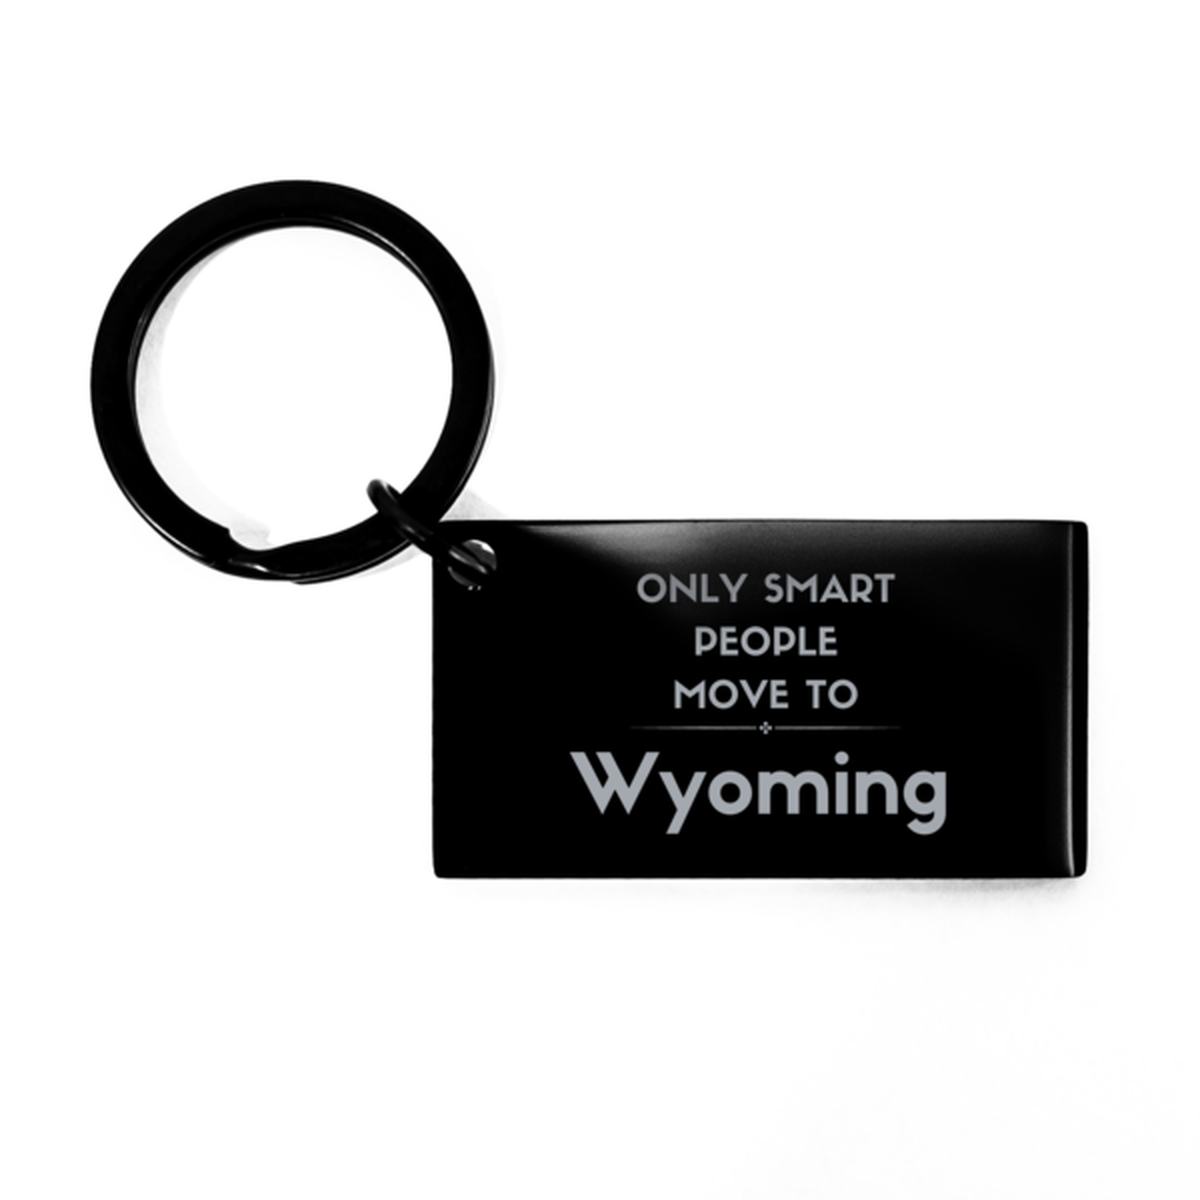 Only smart people move to Wyoming Keychain, Gag Gifts For Wyoming, Move to Wyoming Gifts for Friends Coworker Funny Saying Quote